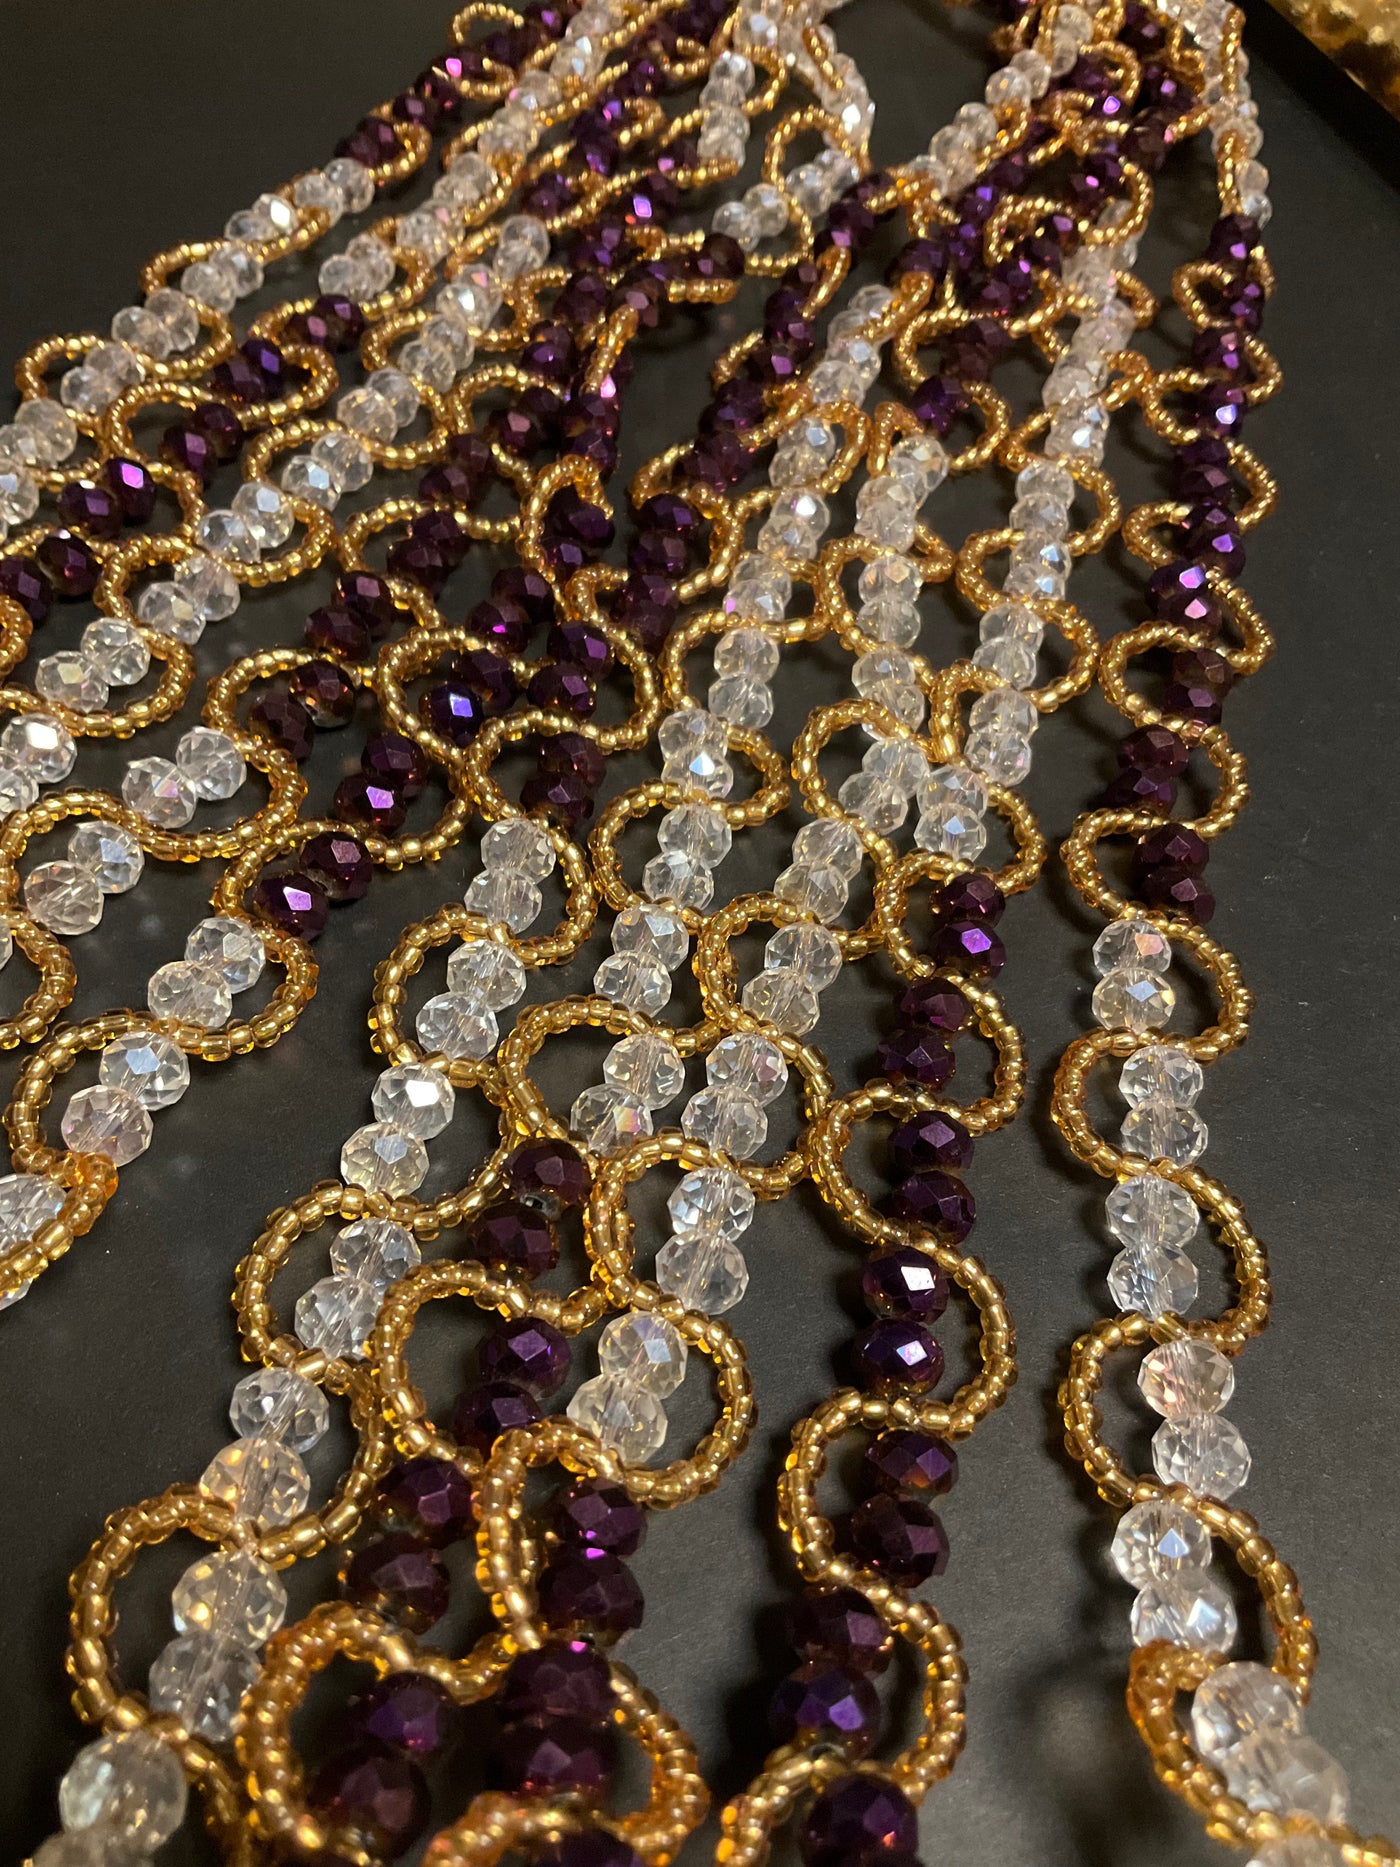 Radiant New Ghana Crystal Waistbead - 3 Vibrant Colors, Clasped Closure - 38” to 49” Red, Gold, Blue, Clear, Purple Iridescent. (Wholesale)